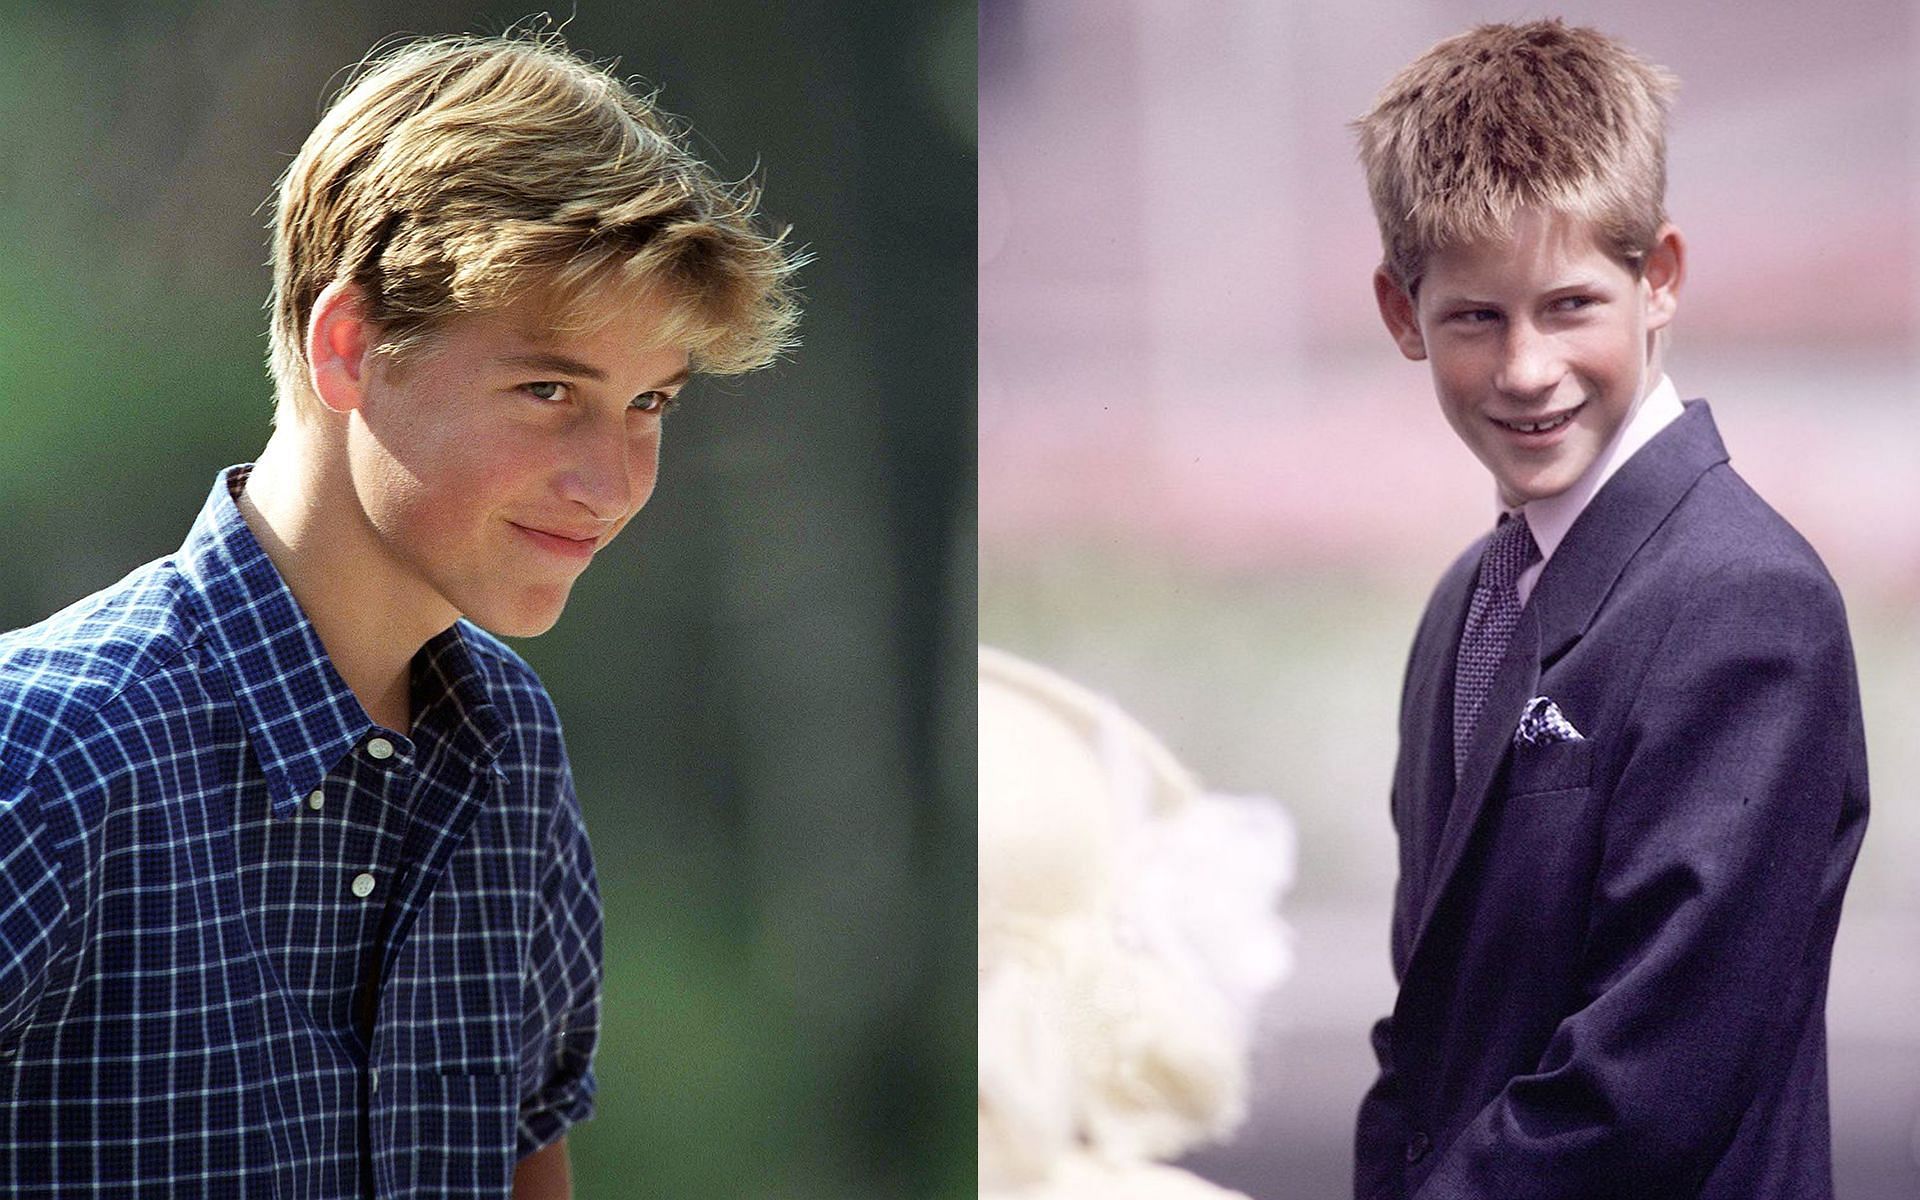 Netflix calls for audition for the roles of Prince William and Prince Harry (Images via Pinterest)